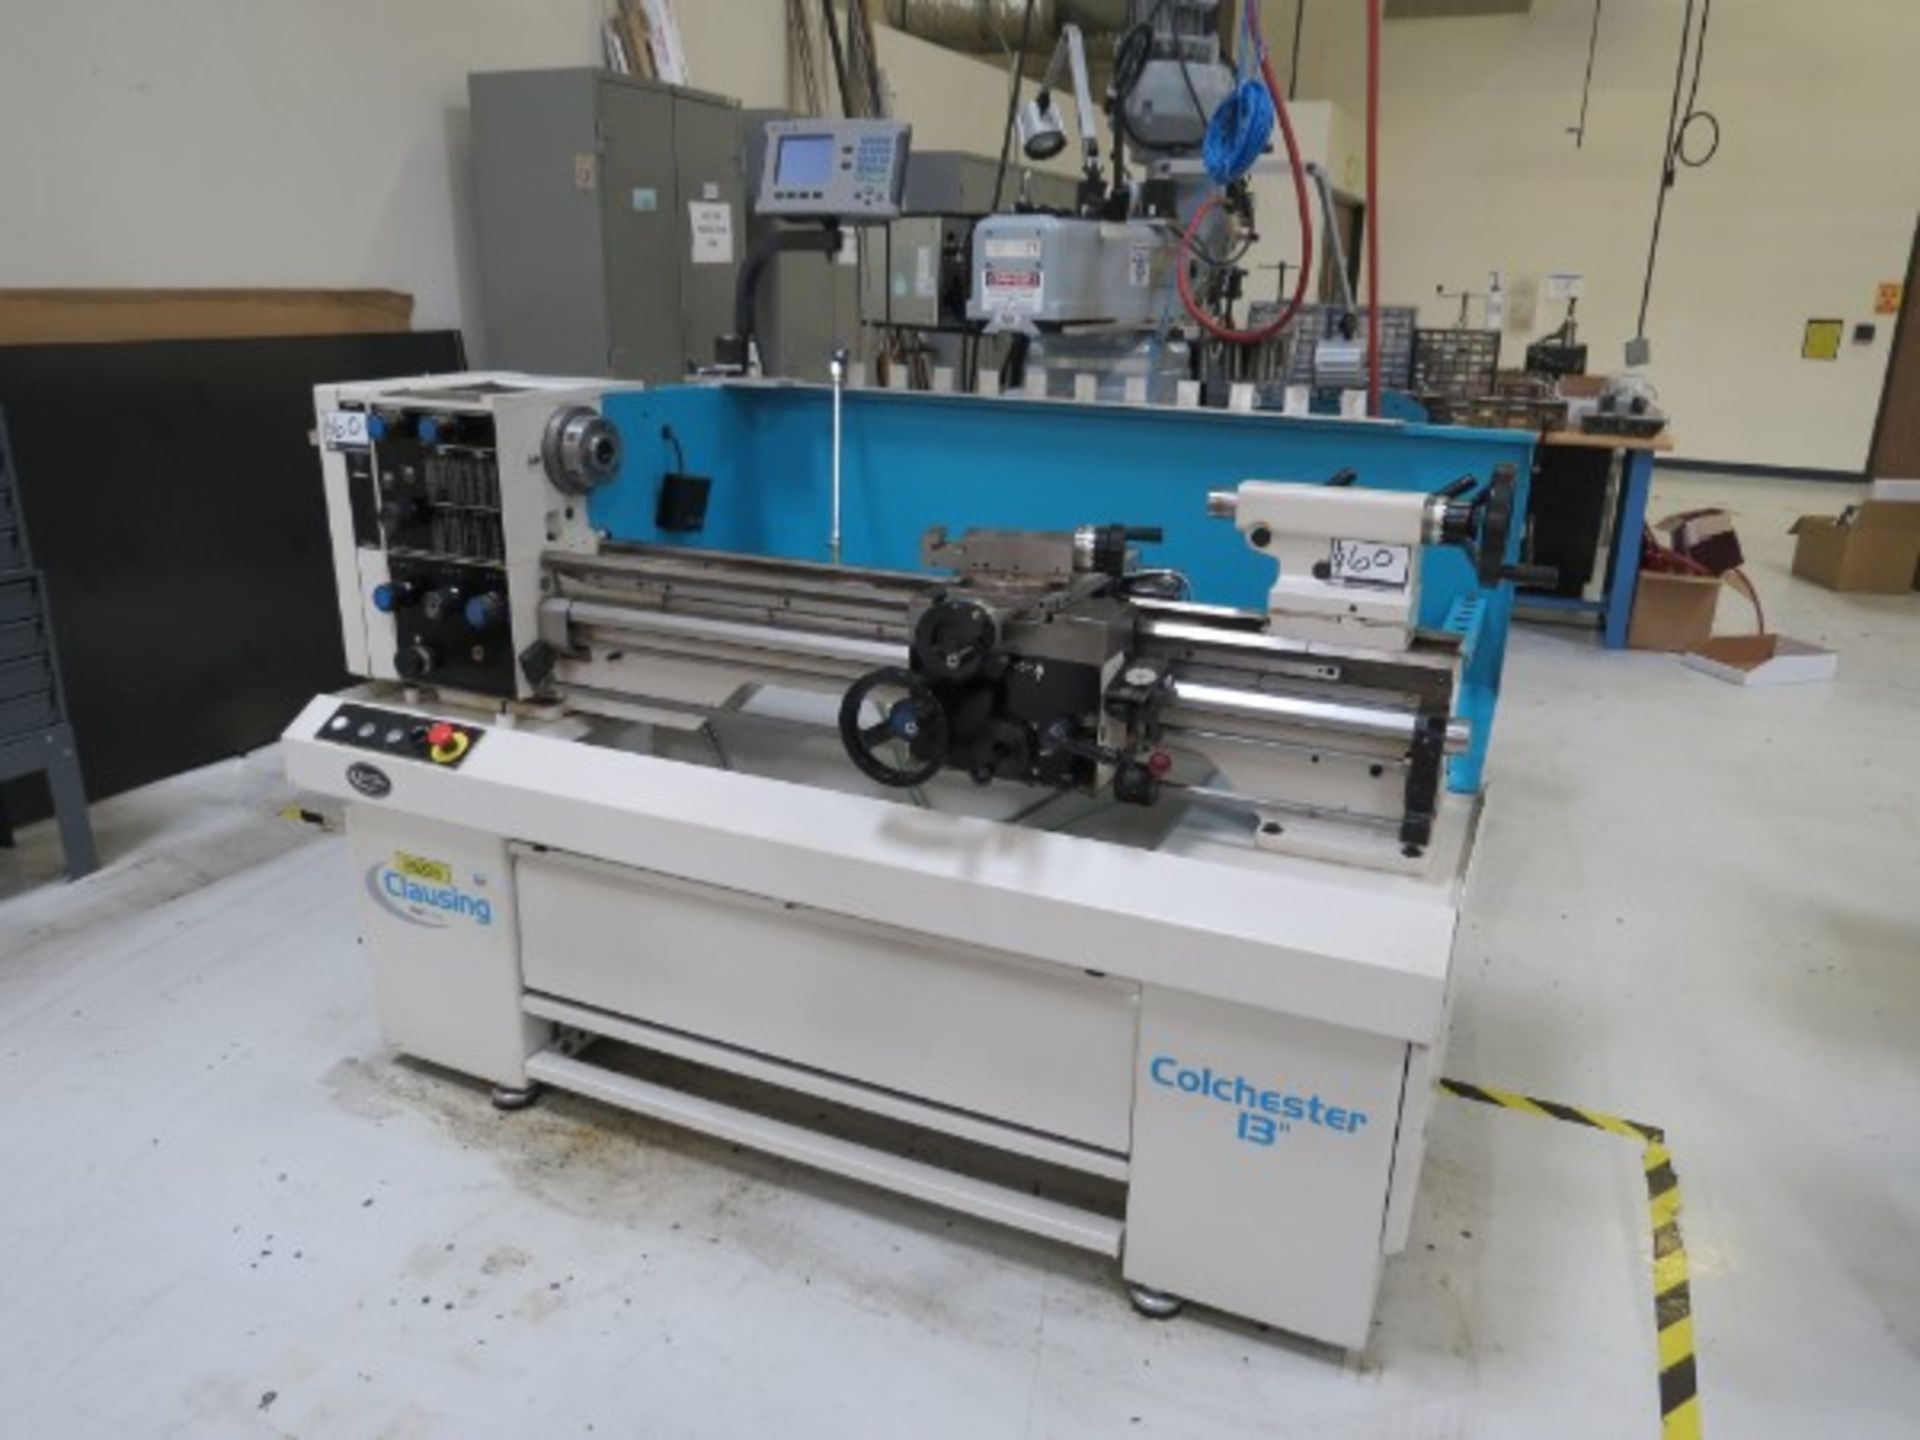 Clausing Colchester 13” Engine Lathe, 13” Sw x 40” centers, I/M threading, DRO, s/n 307325, New 2007 - Image 2 of 6